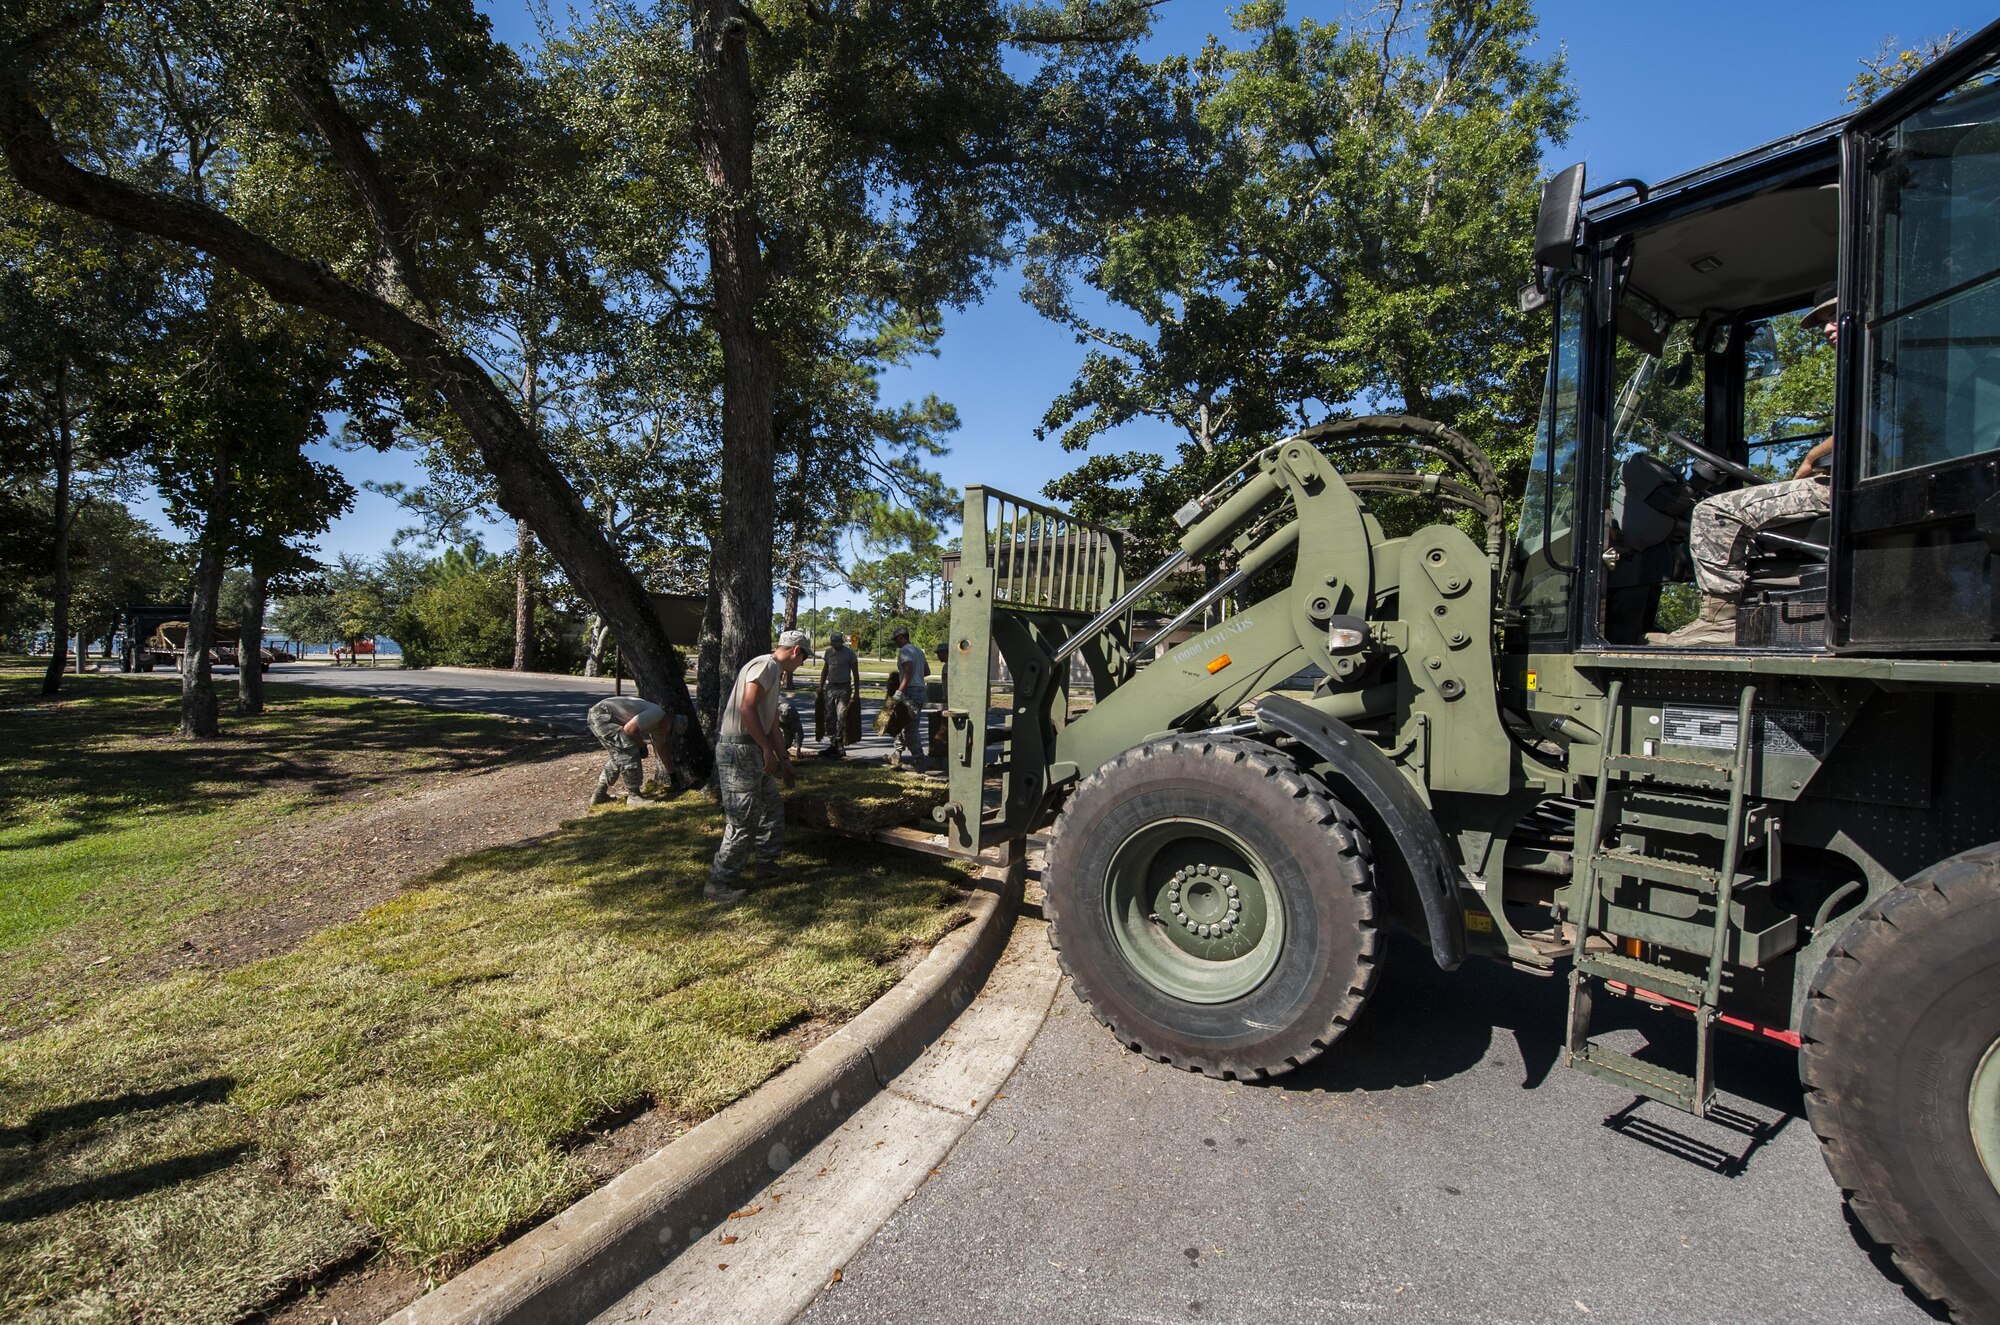 Airmen with the 1st Special Operations Civil Engineer Squadron lay sod at Hurlburt Field, Fla., Oct. 4, 2016. Civil engineer Airmen laid 34 pallets of sod outside the Soundside Club to replace dead grass. (U.S. Air Force photo by Airman 1st Class Joseph Pick)